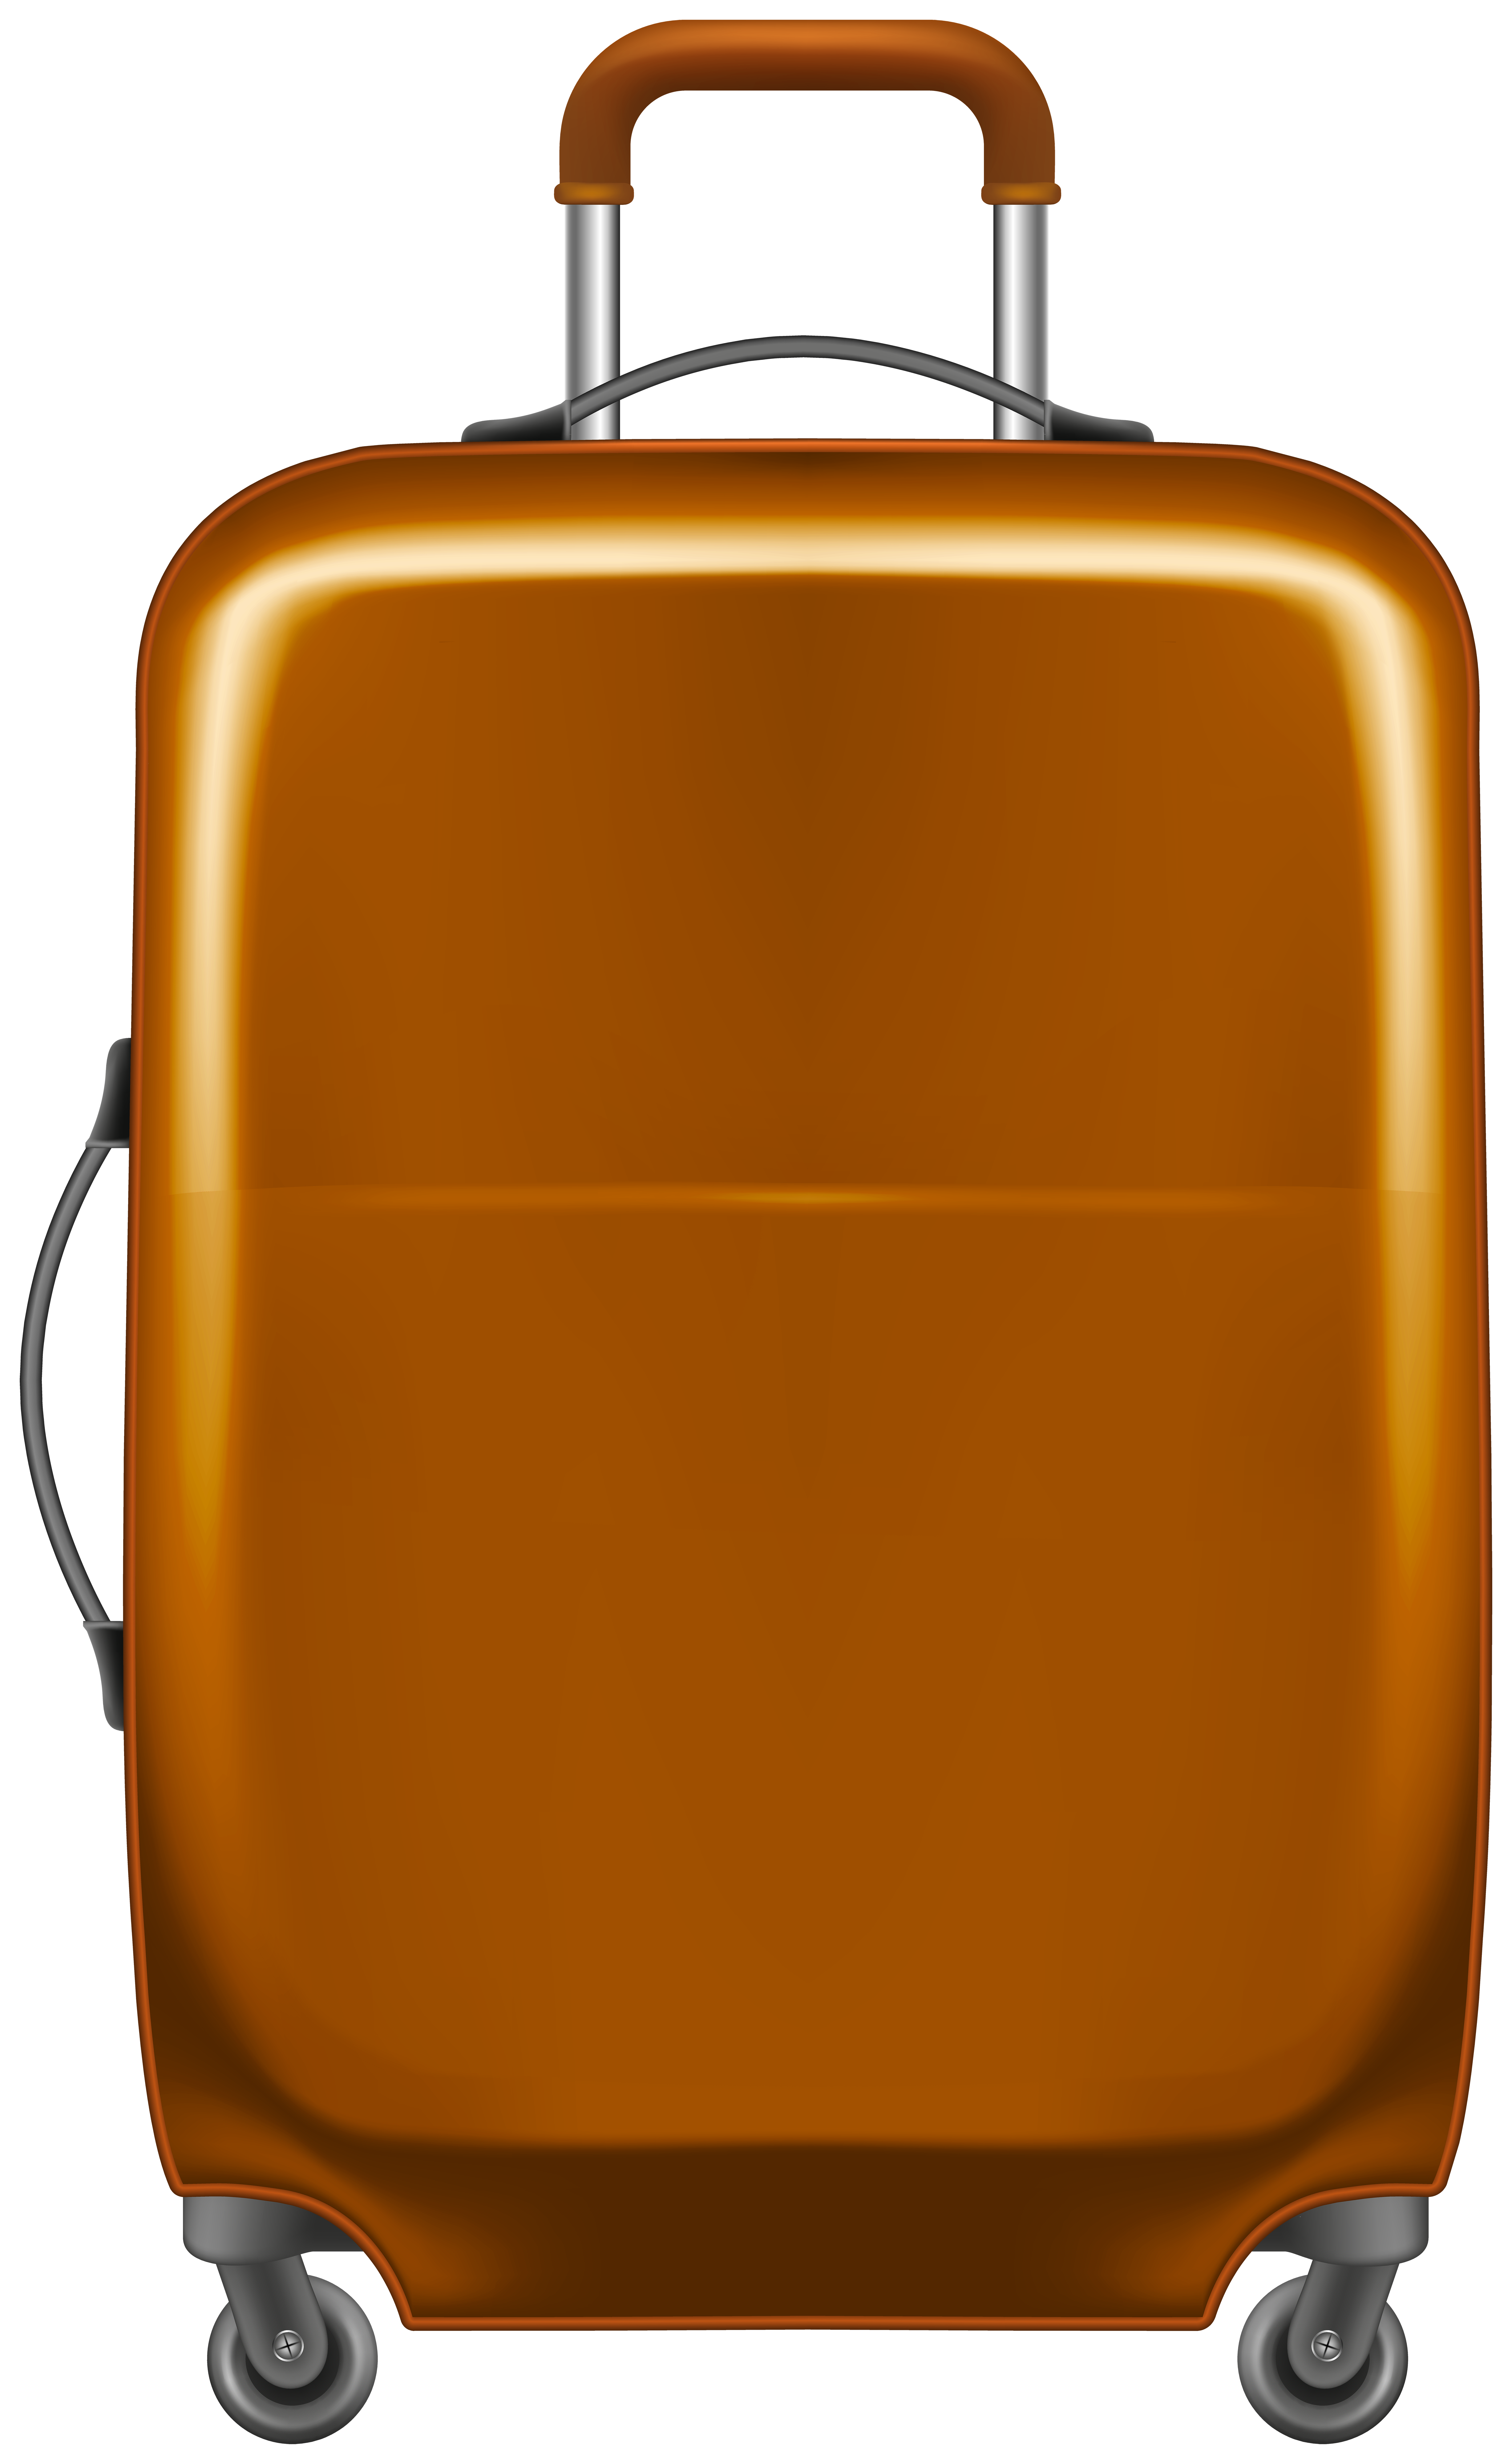 Trolley Bag Brown PNG Clipart.